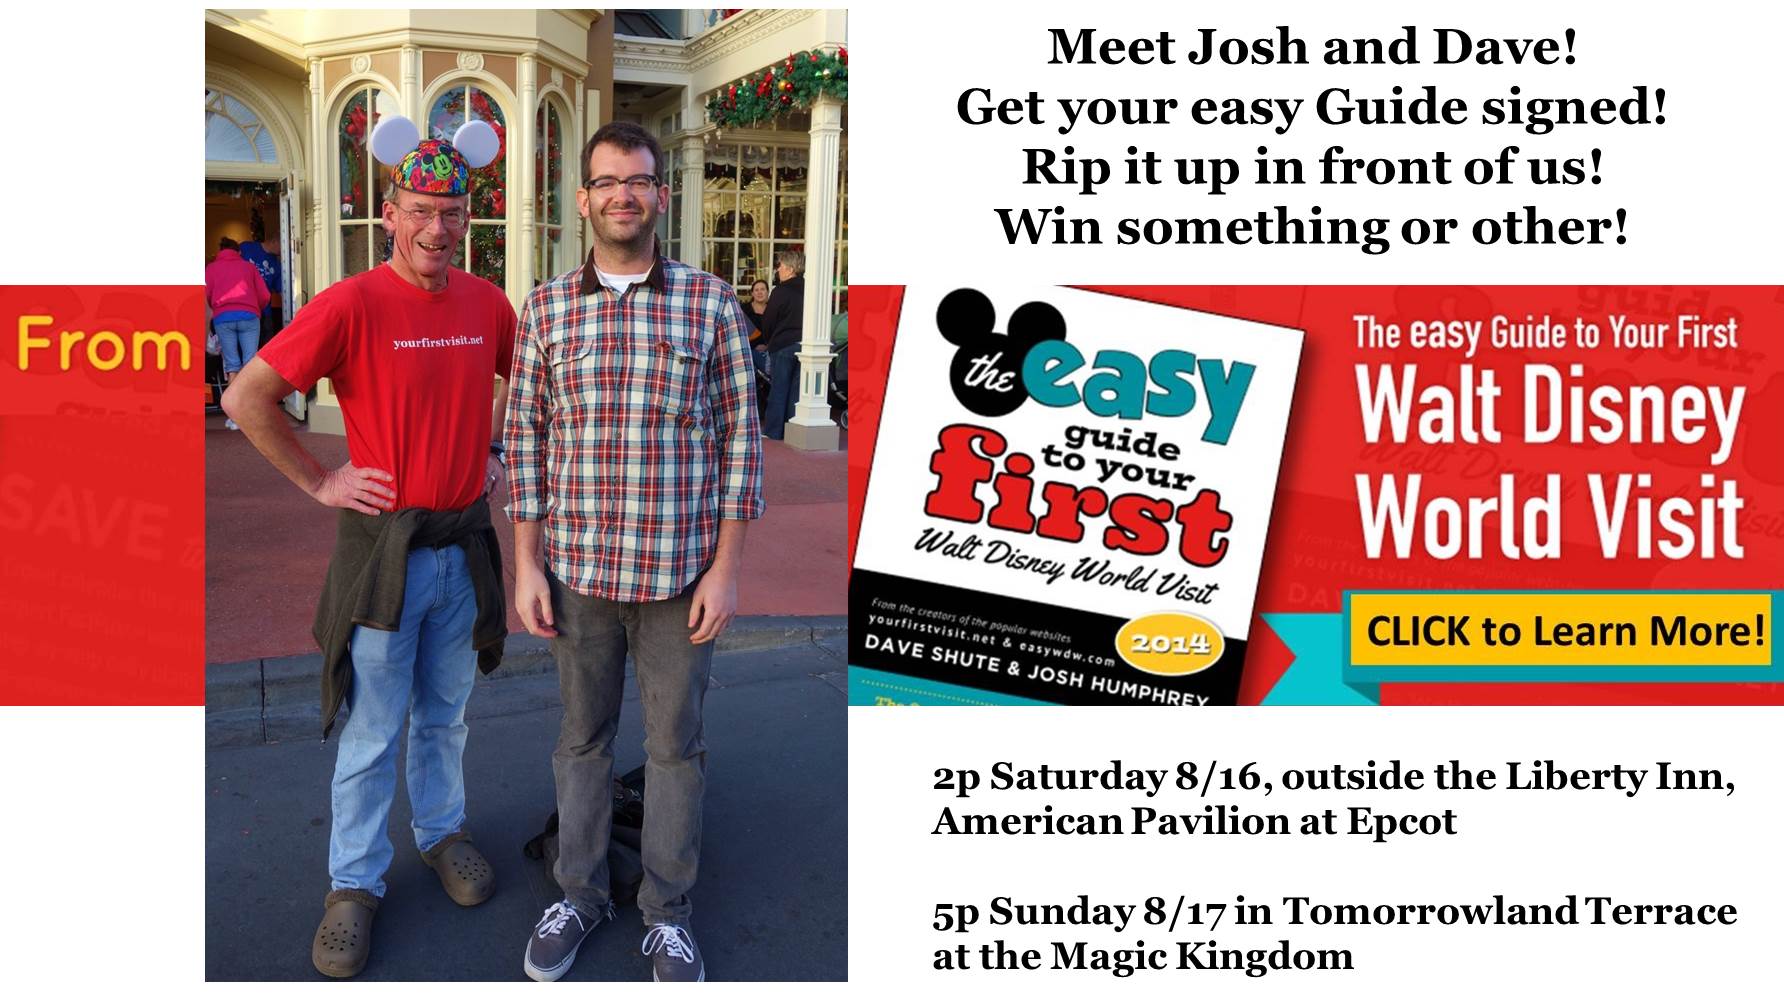 The easy Guide Authors Meet-up 8-16 and 8-17